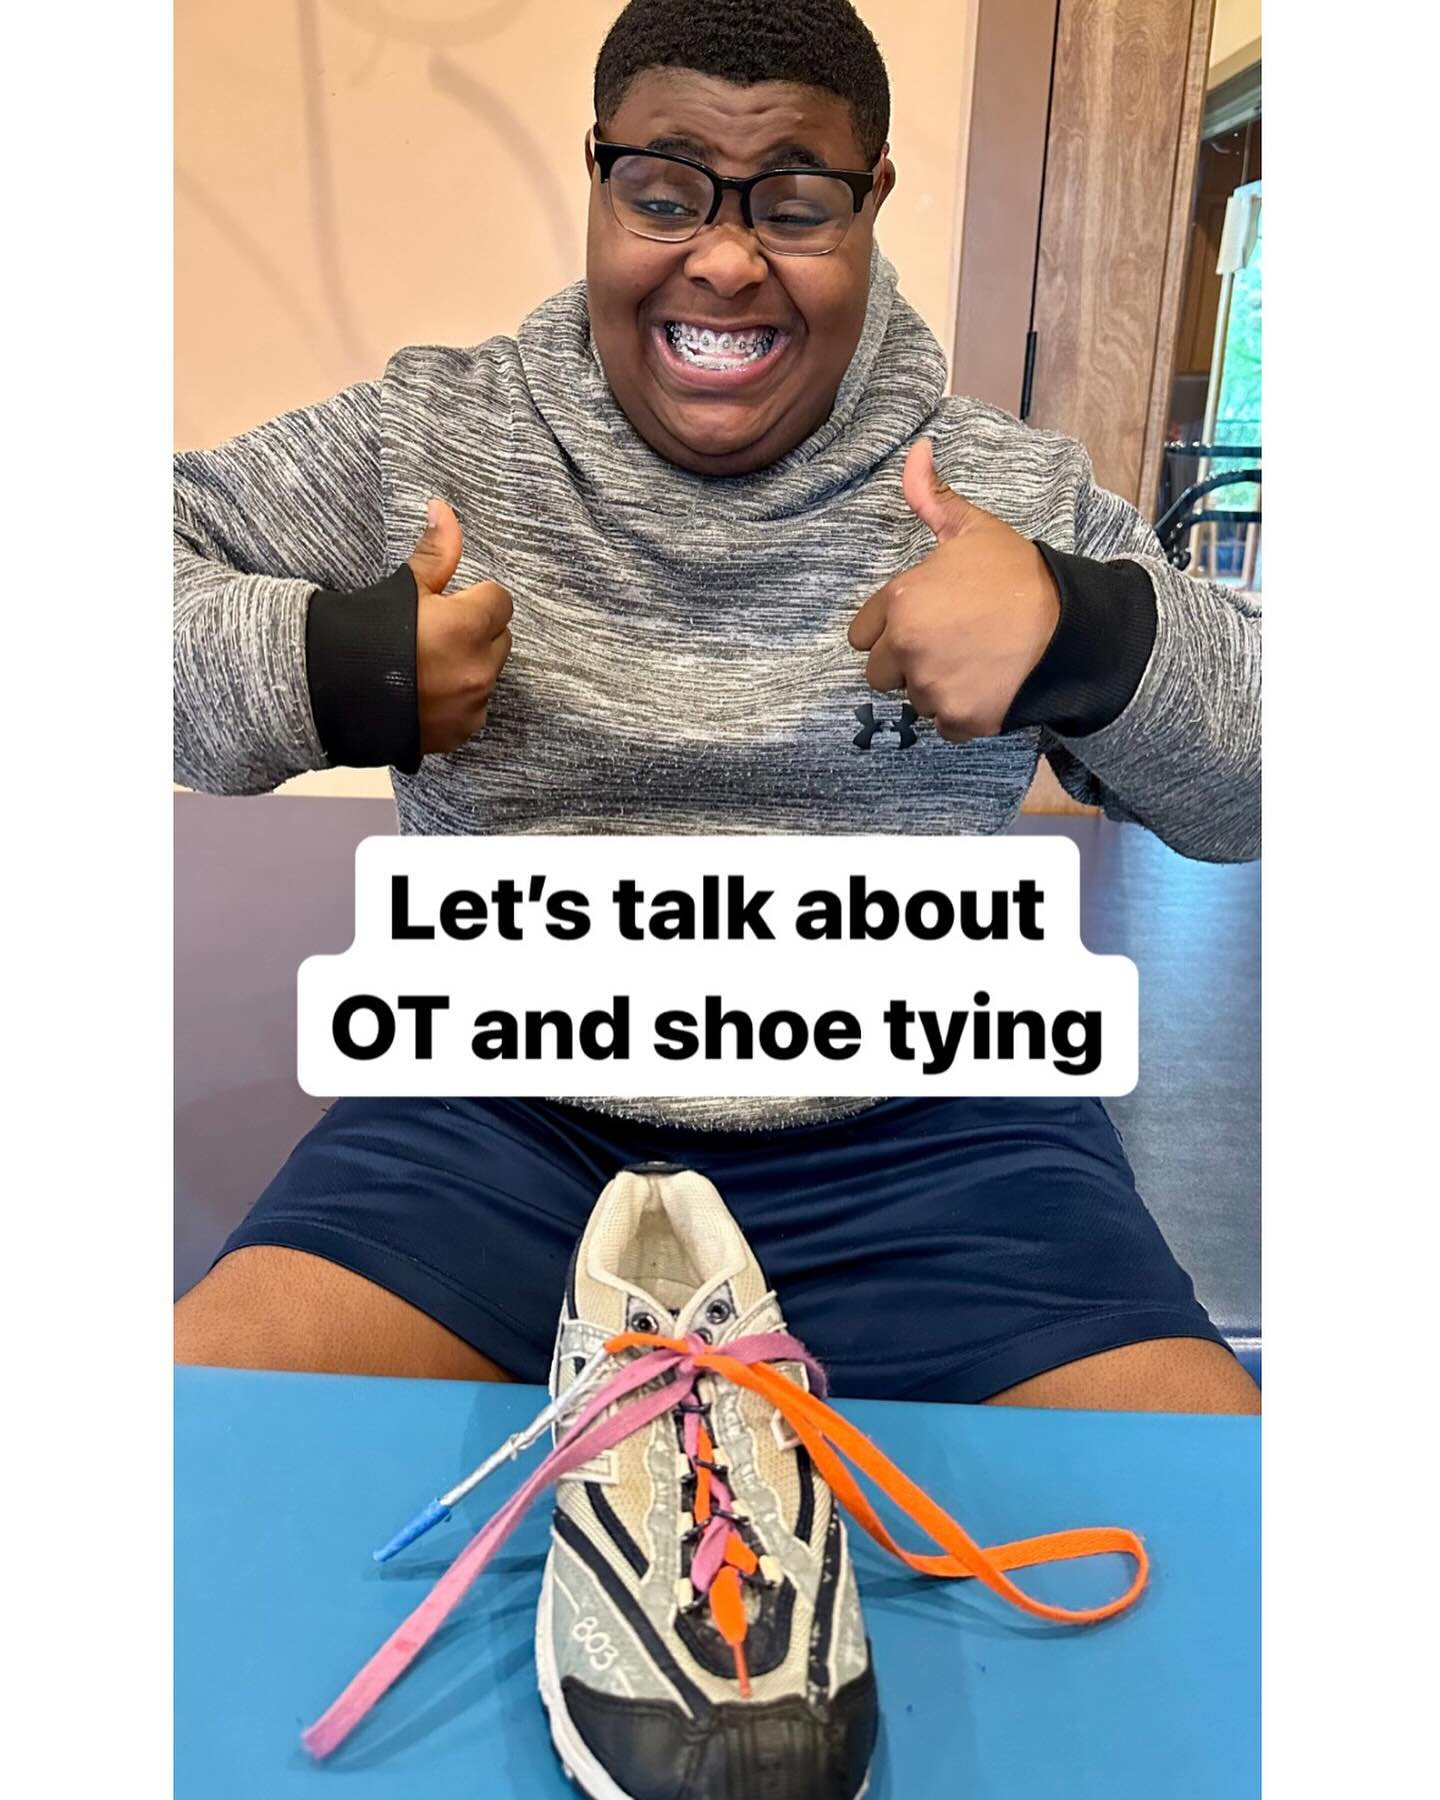 We are halfway through OT month already! Today, our OTs wanted to talk about shoe tying &ndash;
&nbsp;
One of our jobs as OTs is to teach adaptive strategies to help achieve independence, and this includes tying our shoes. There are many different wa